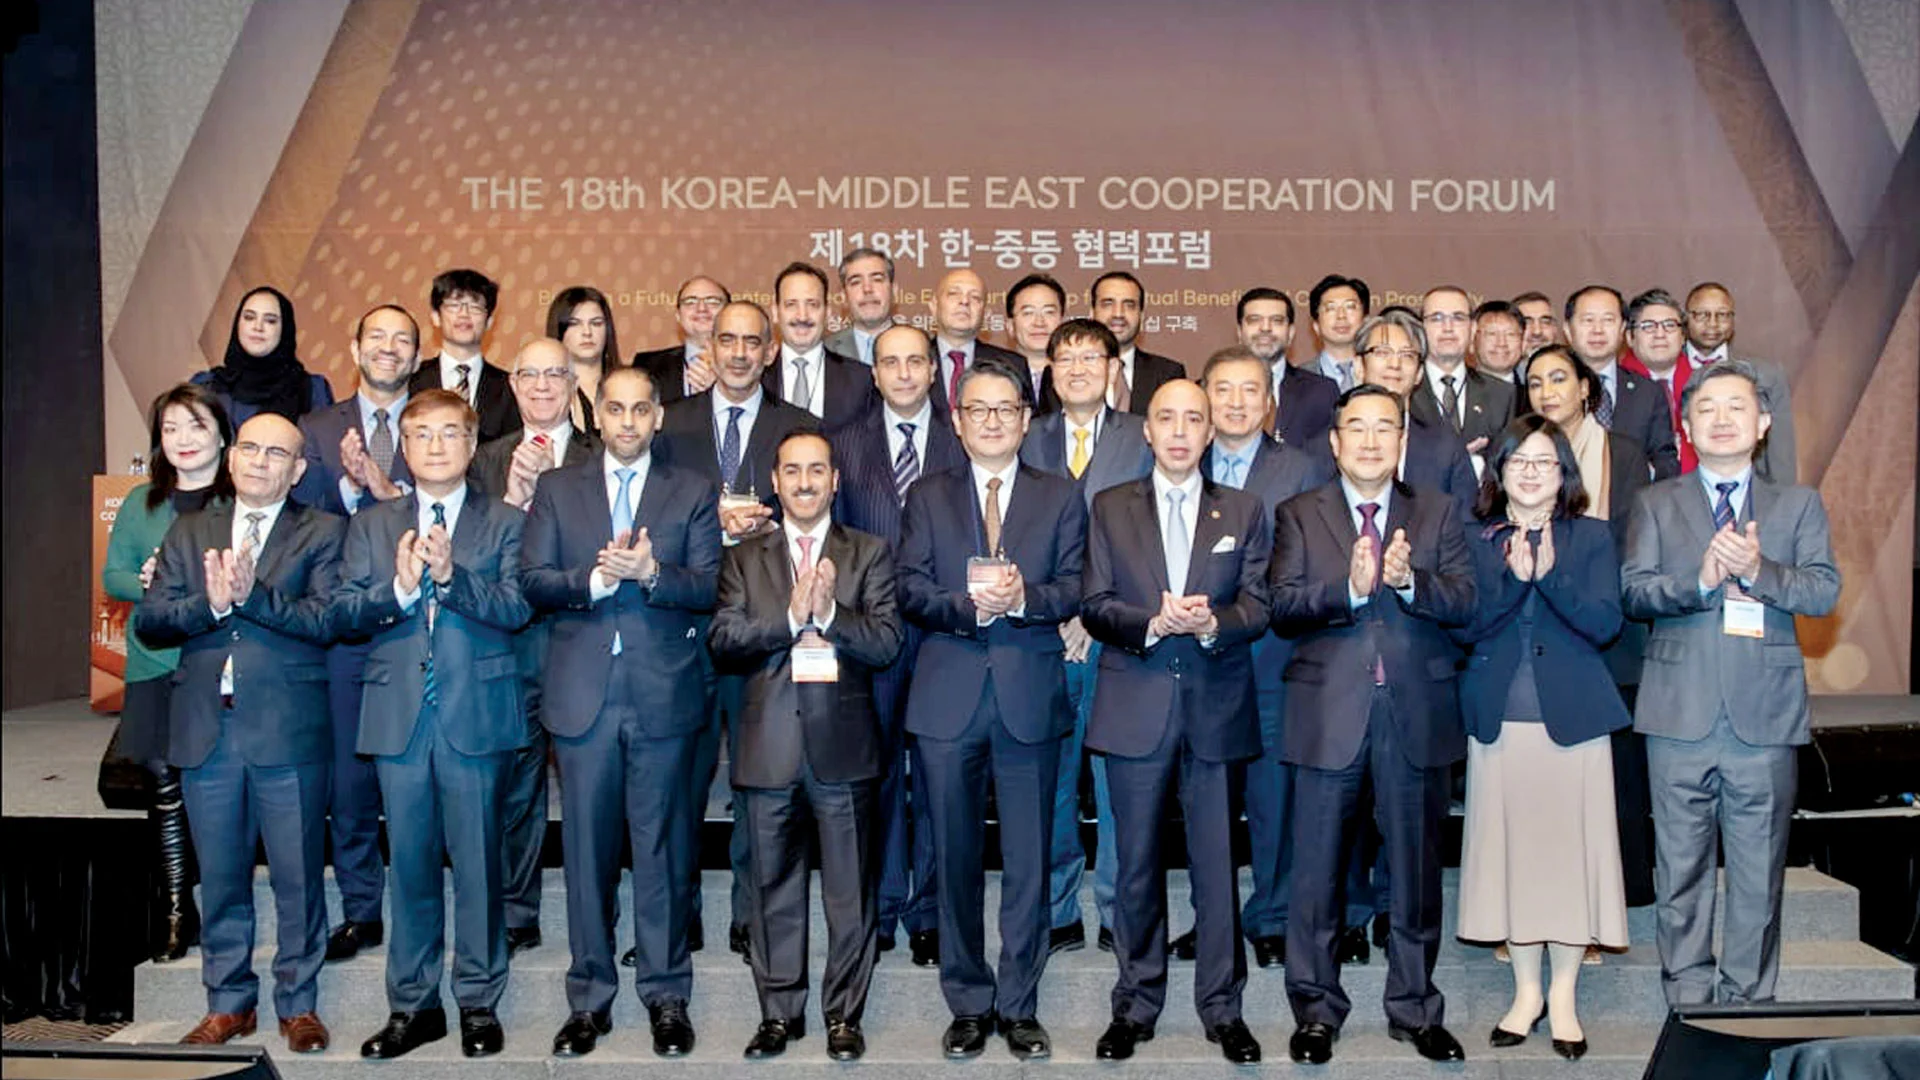 Qatar to Host 19th Session of Korea-Middle East Cooperation Forum